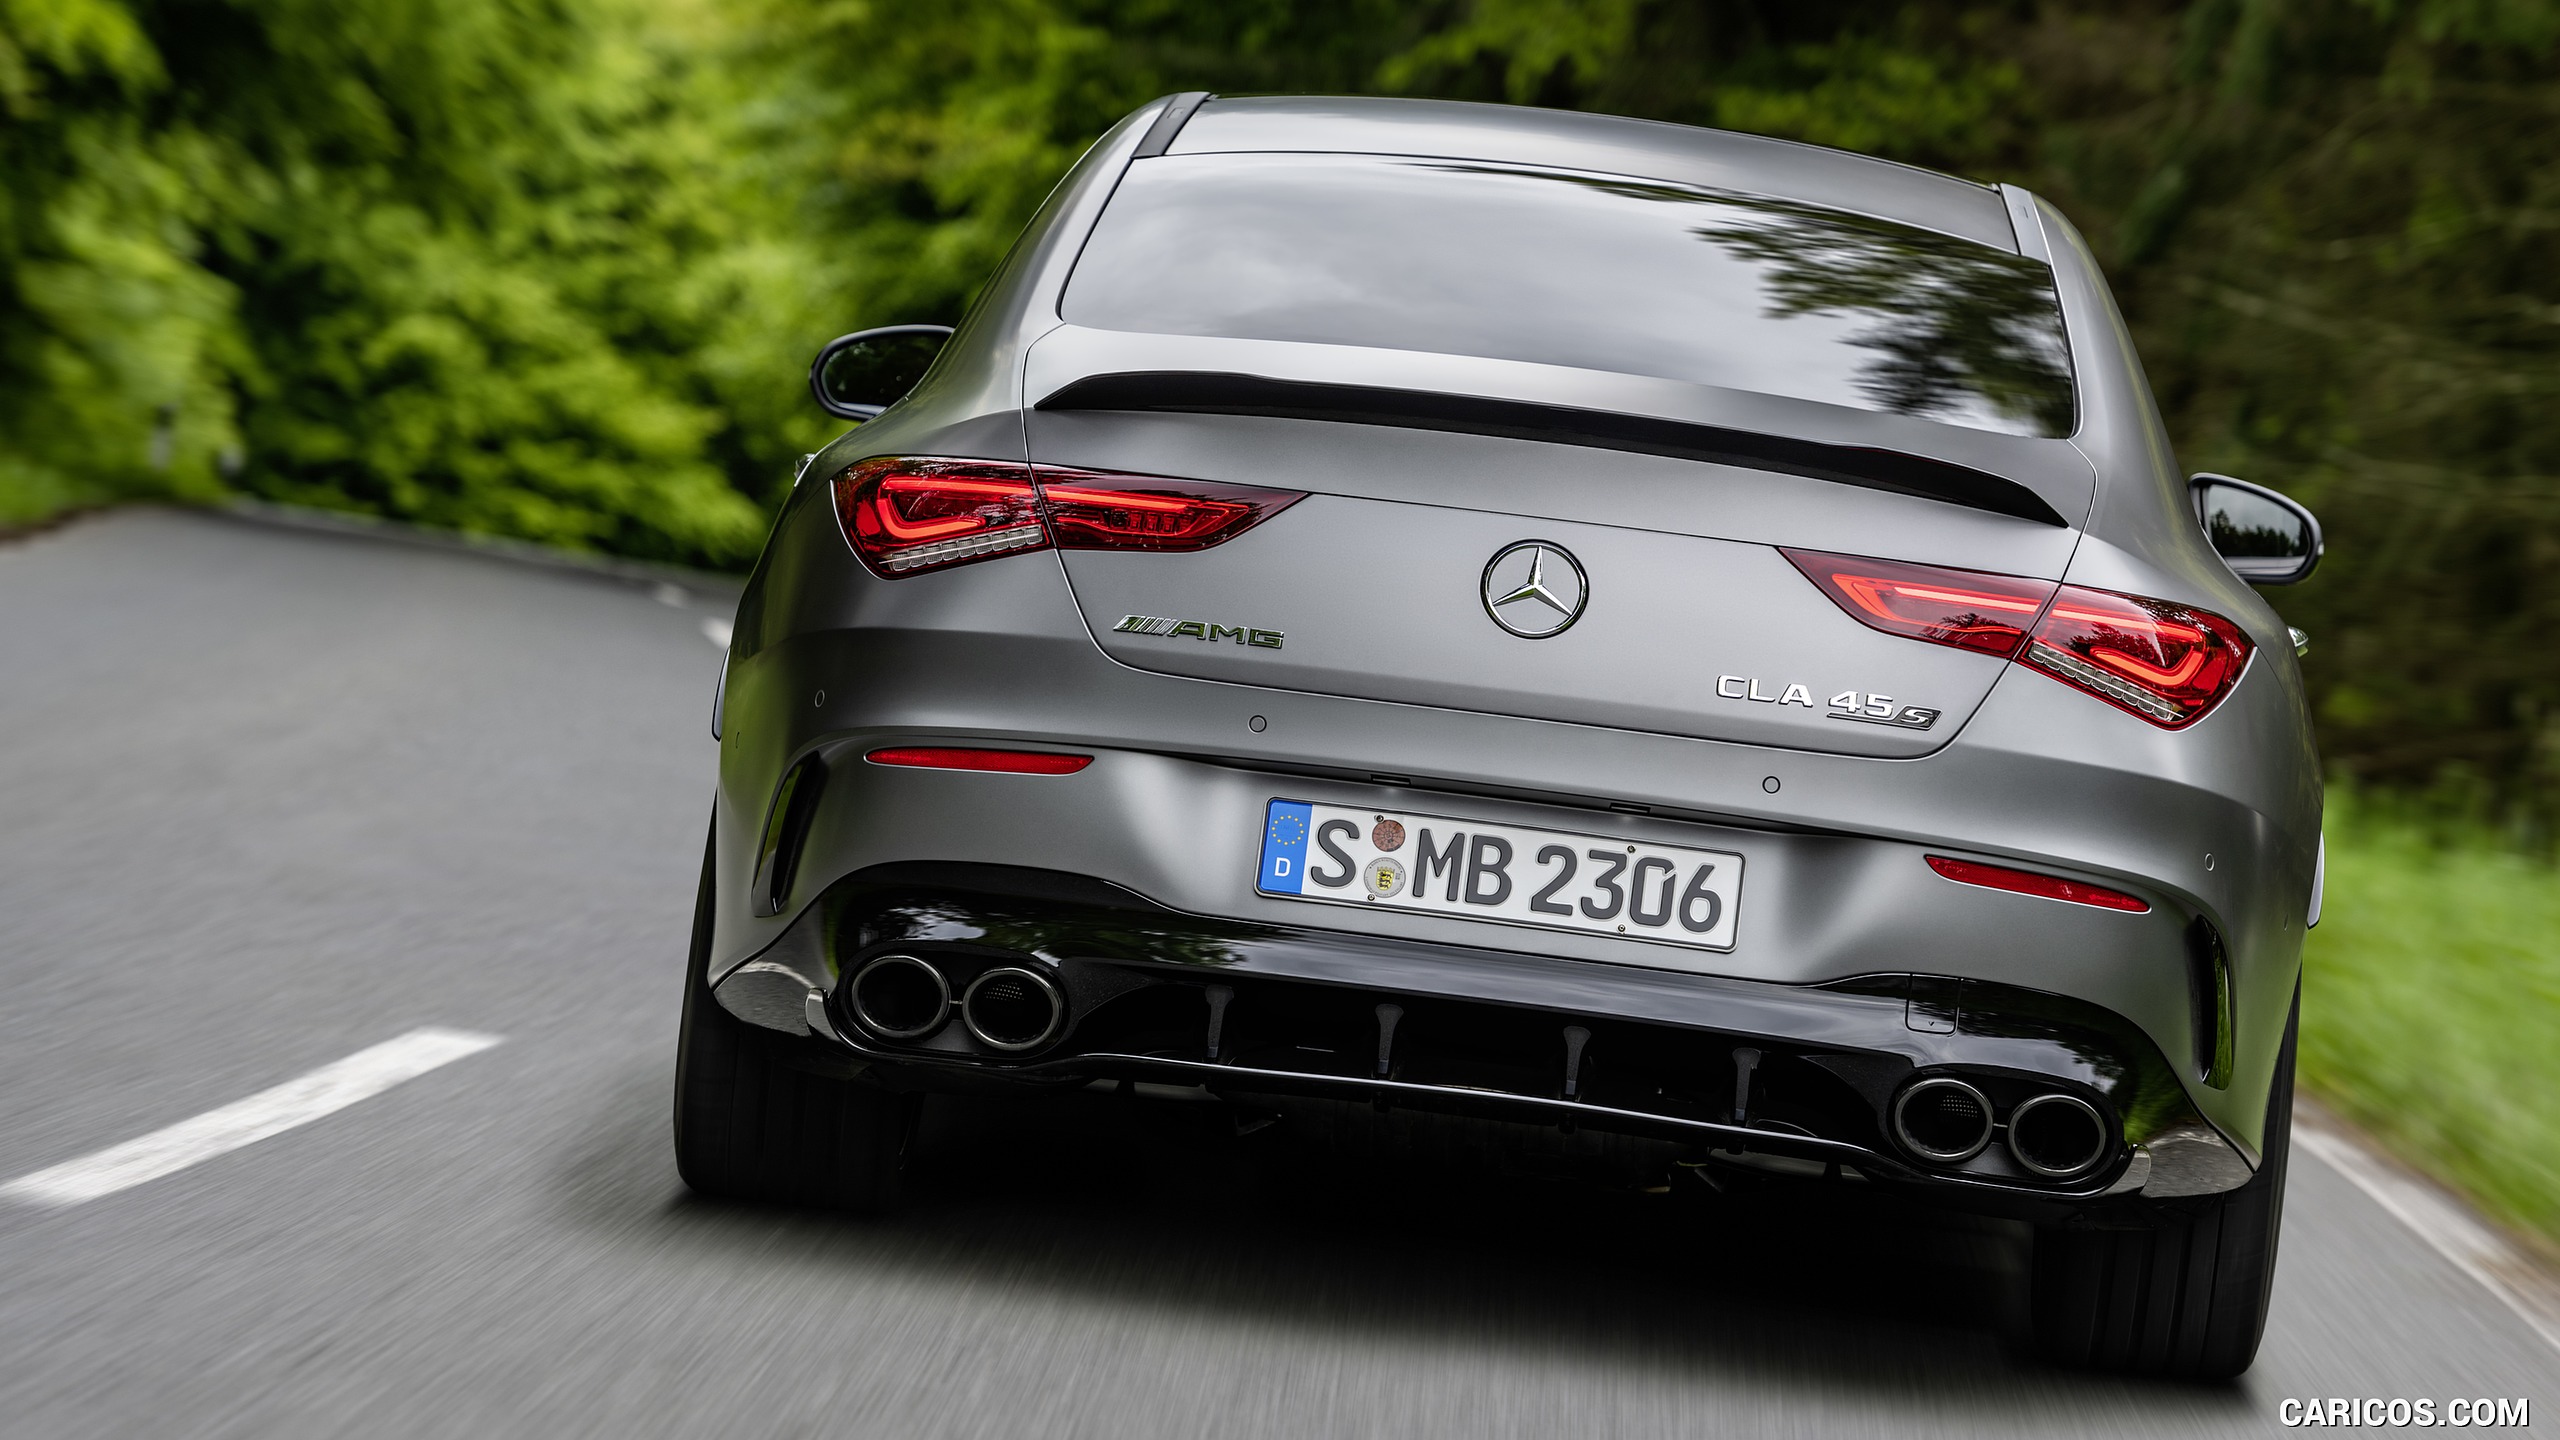 2020 Mercedes-AMG CLA 45 S 4MATIC+ - Rear, #6 of 159